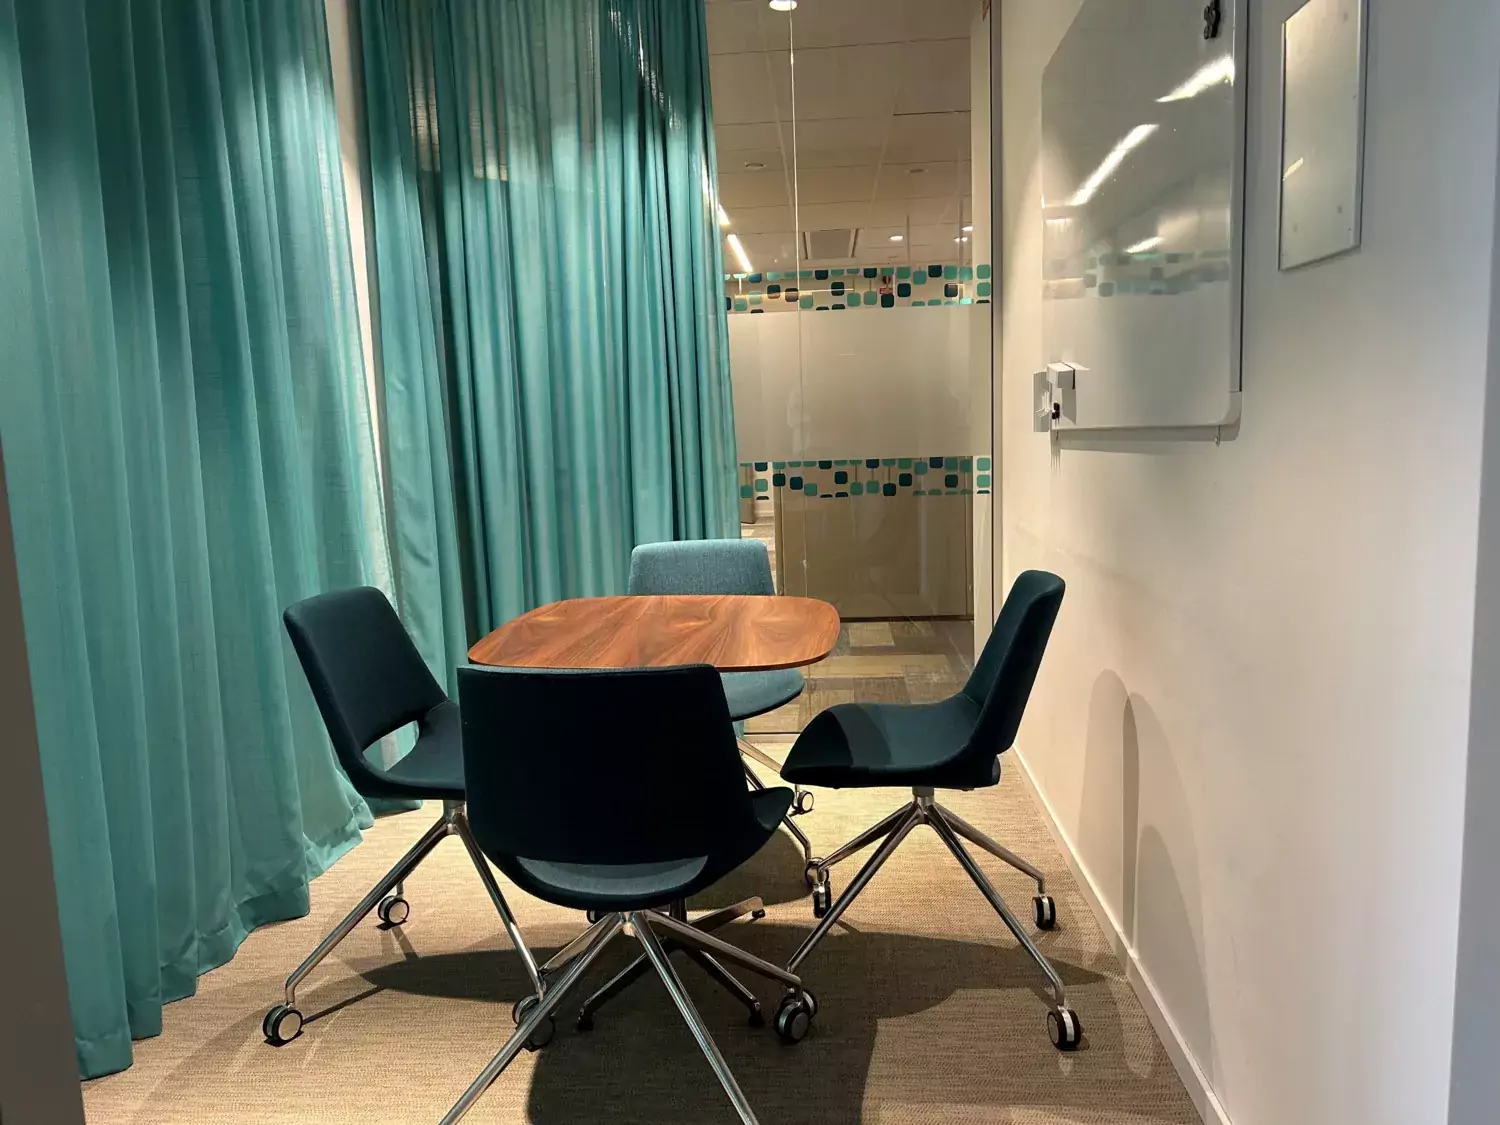 Picture of a meeting room with four blue chairs and a small wooden table. Green thin curtains surround the walls.